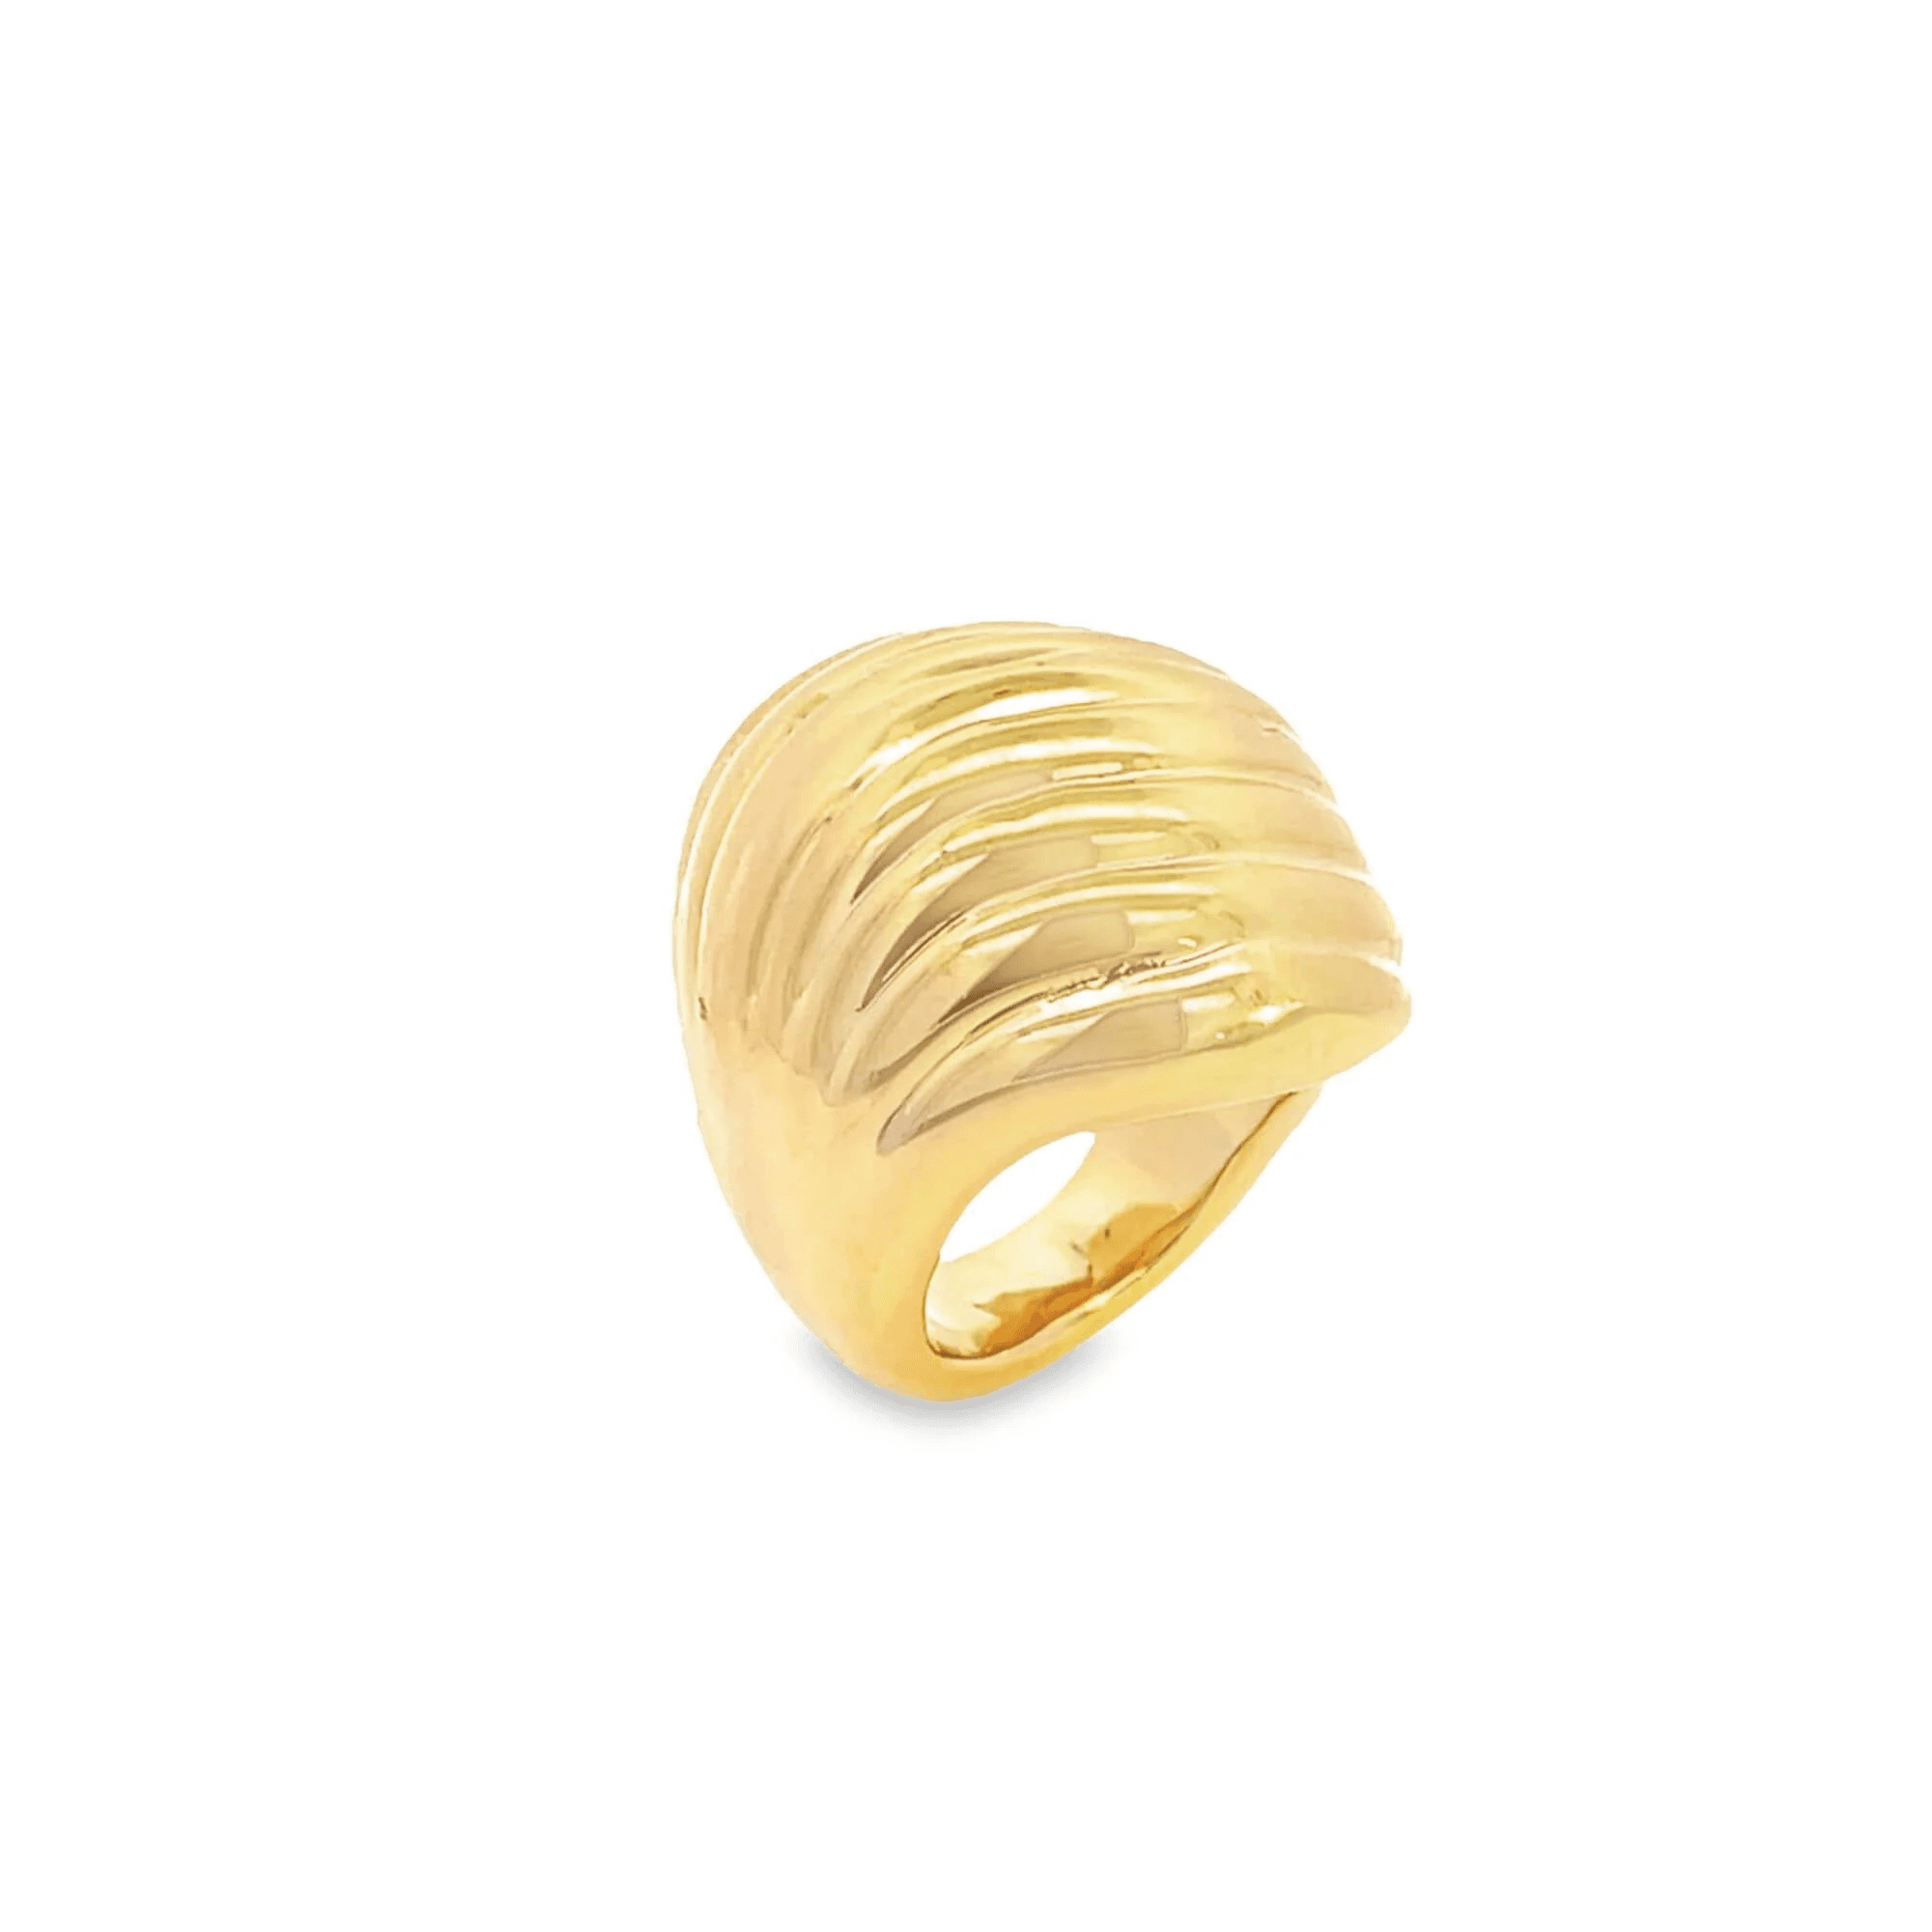 Croissant Wavy Dome Statement Ring in 18K Gold Filled from Inaury.com